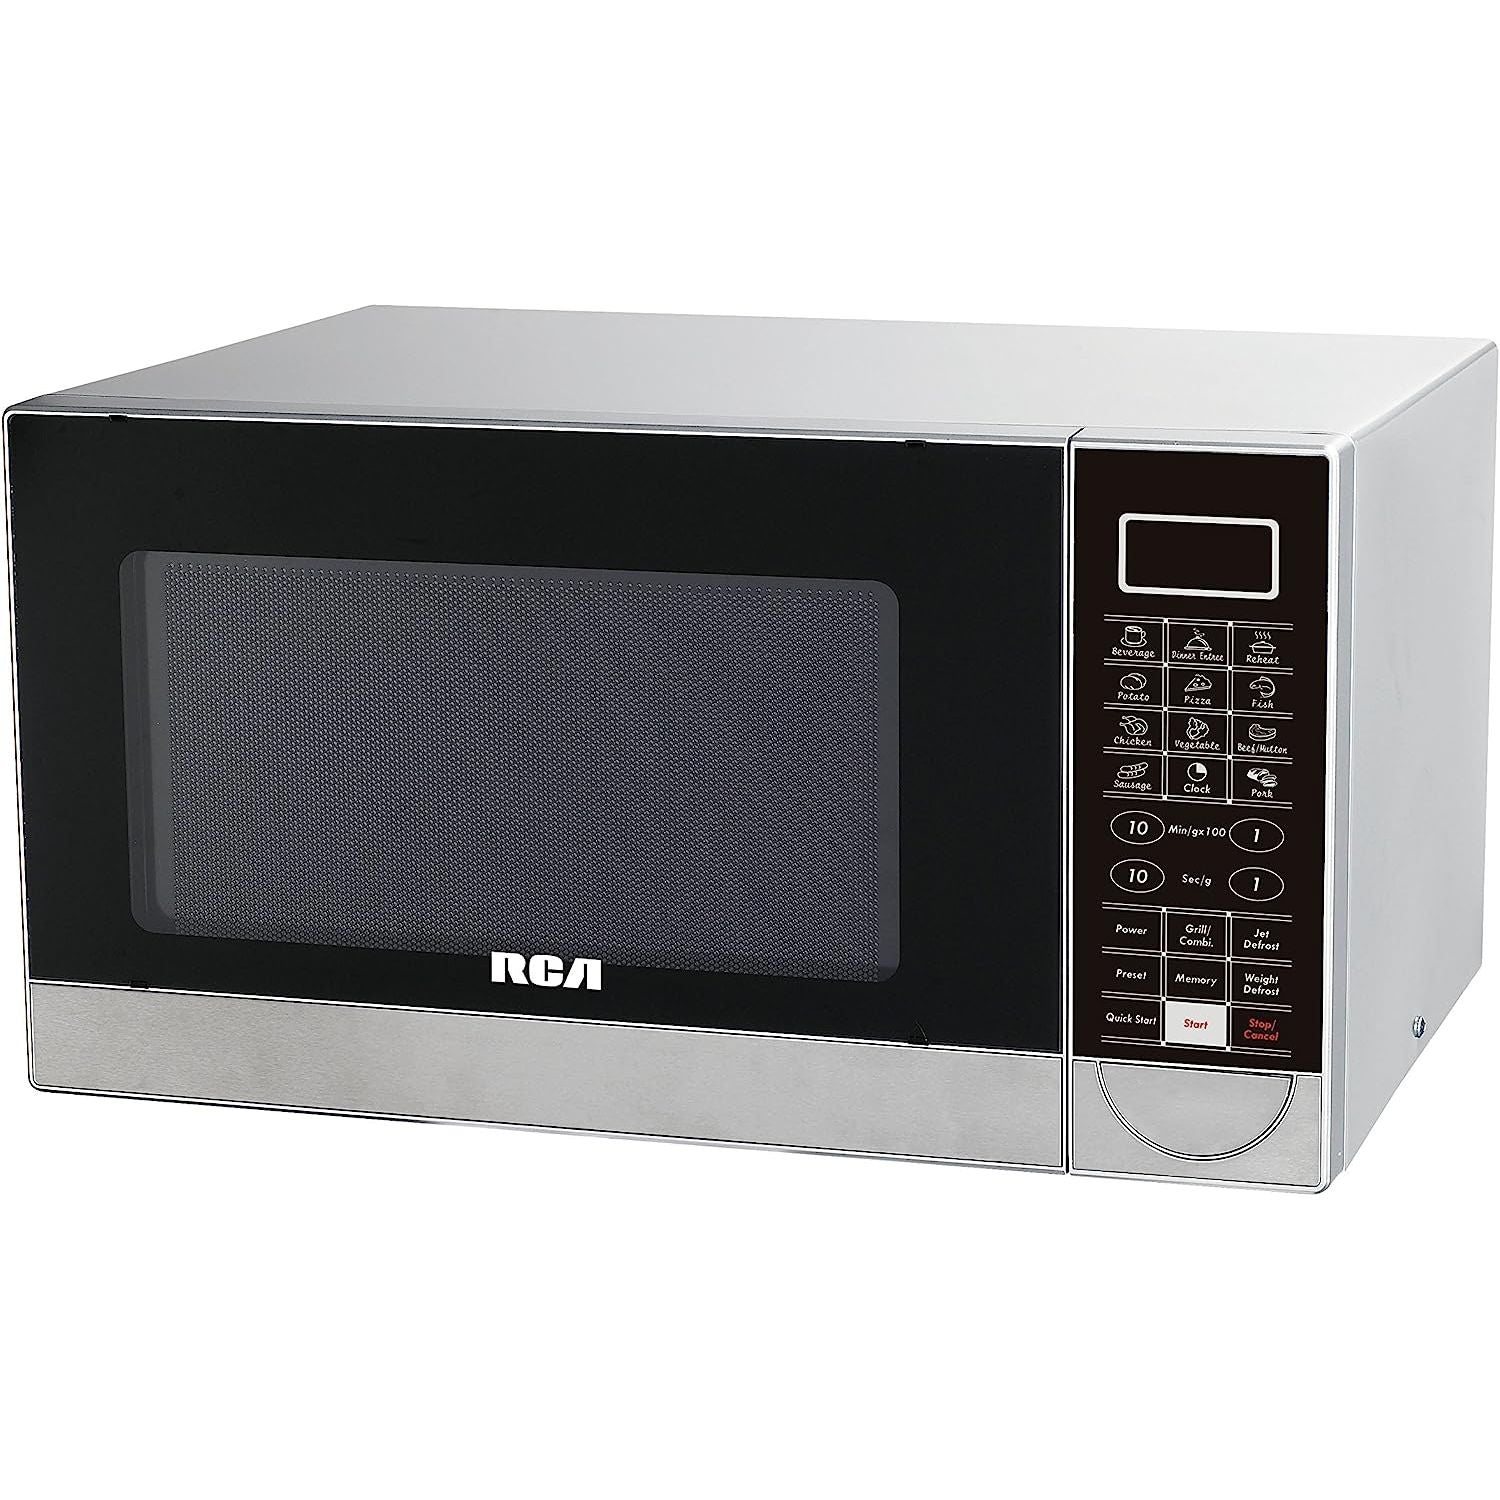 RCA Microwave and Grill, 1.1 Cubic Feet, Stainless Steel RMW1182